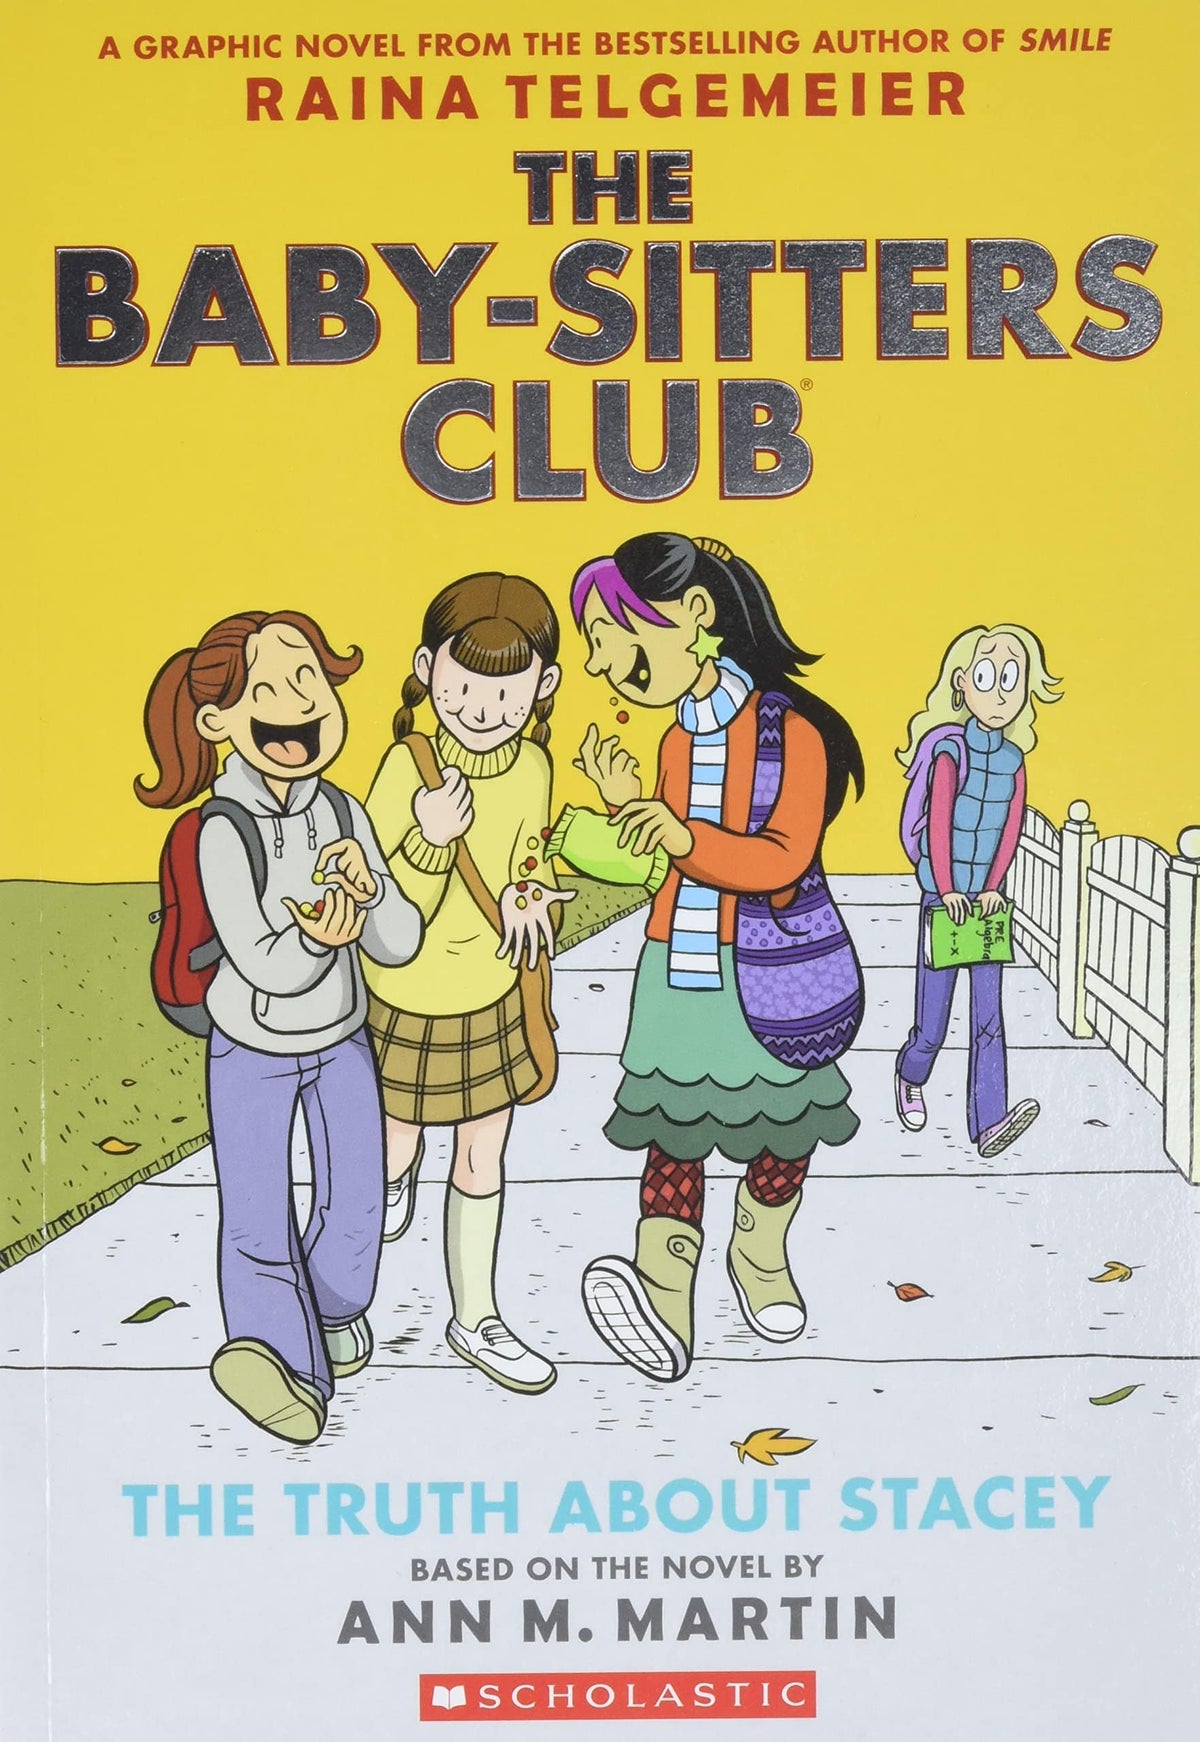 Baby-Sitters Club Vol. 2: Truth about Stacey - Third Eye